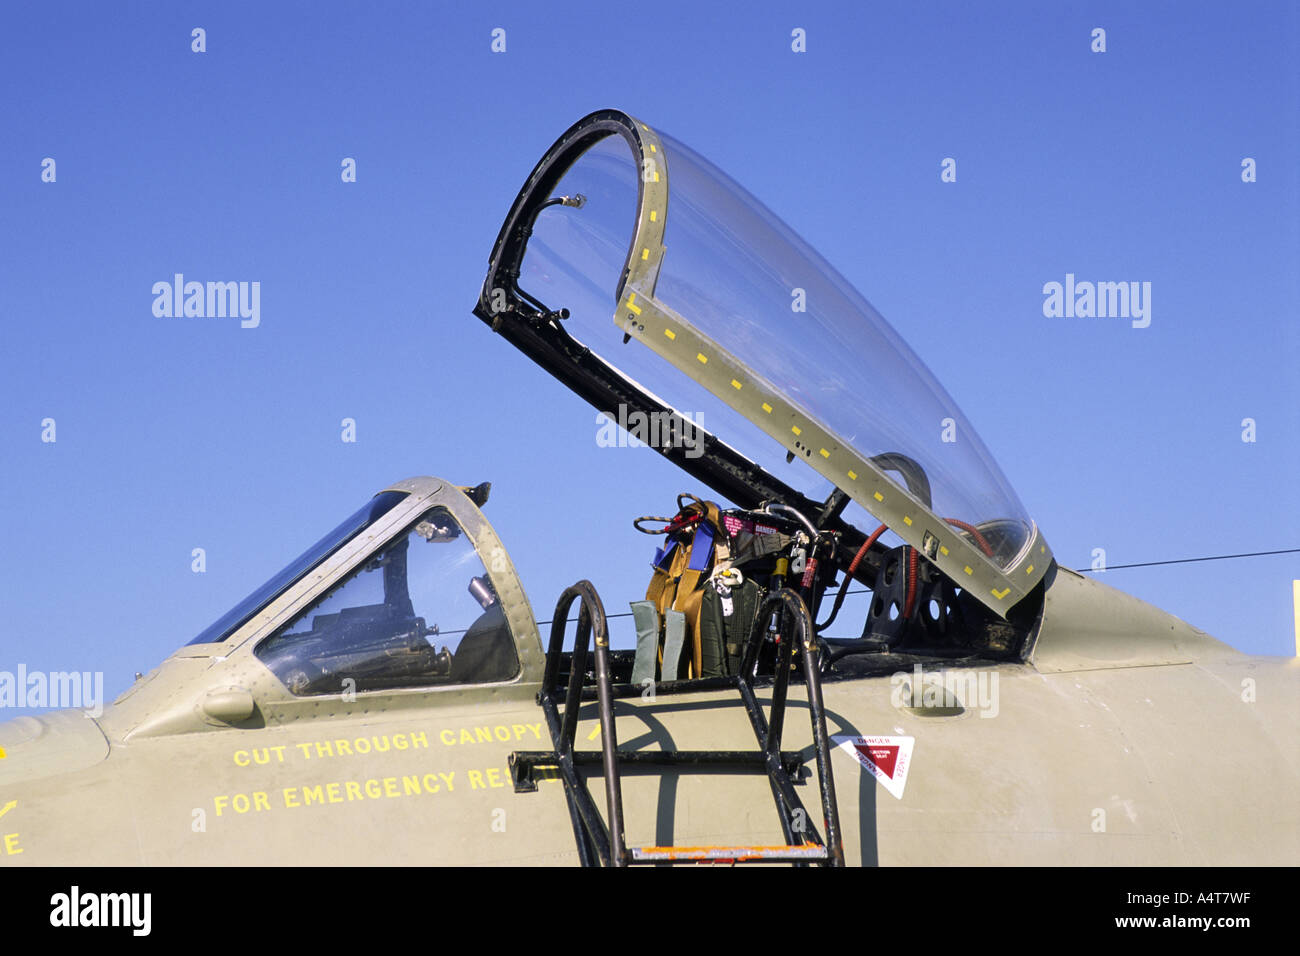 BAe Canberra PR9 Cockpit Canopy & Ejector Seat Stock Photo